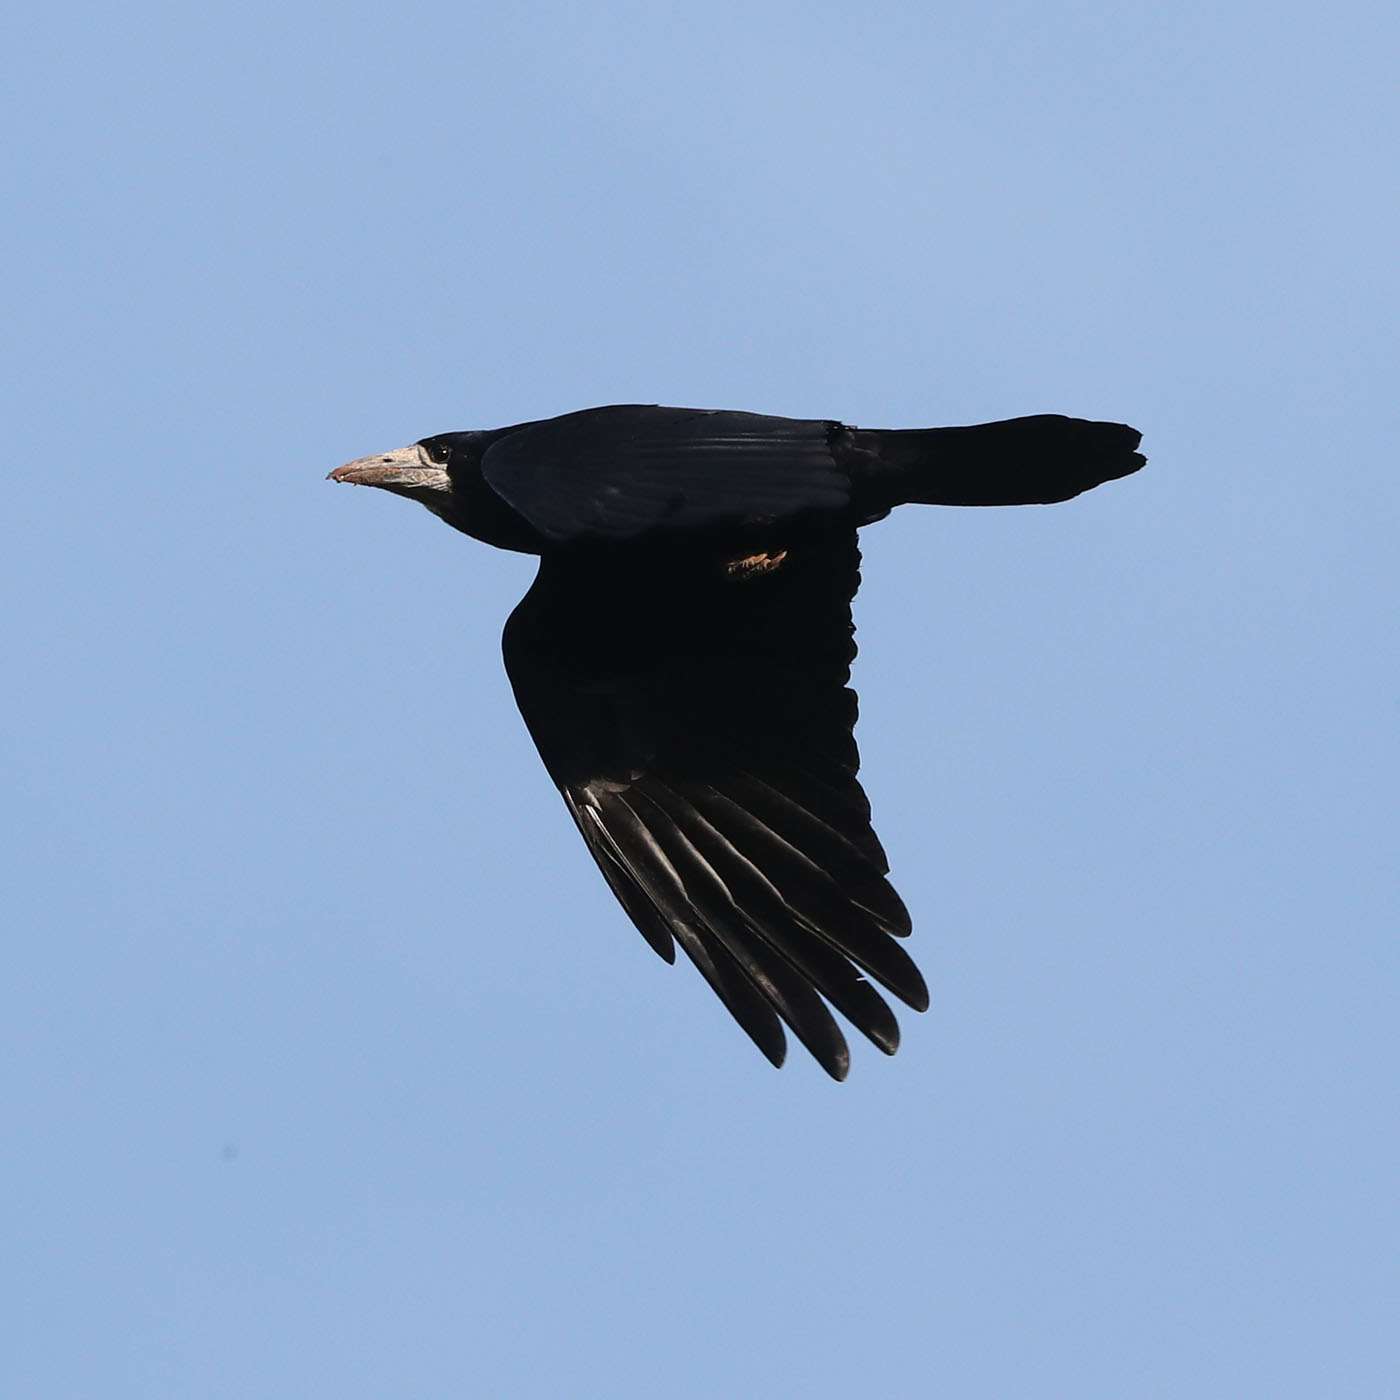 Rook by Steve Hopper at South Brent